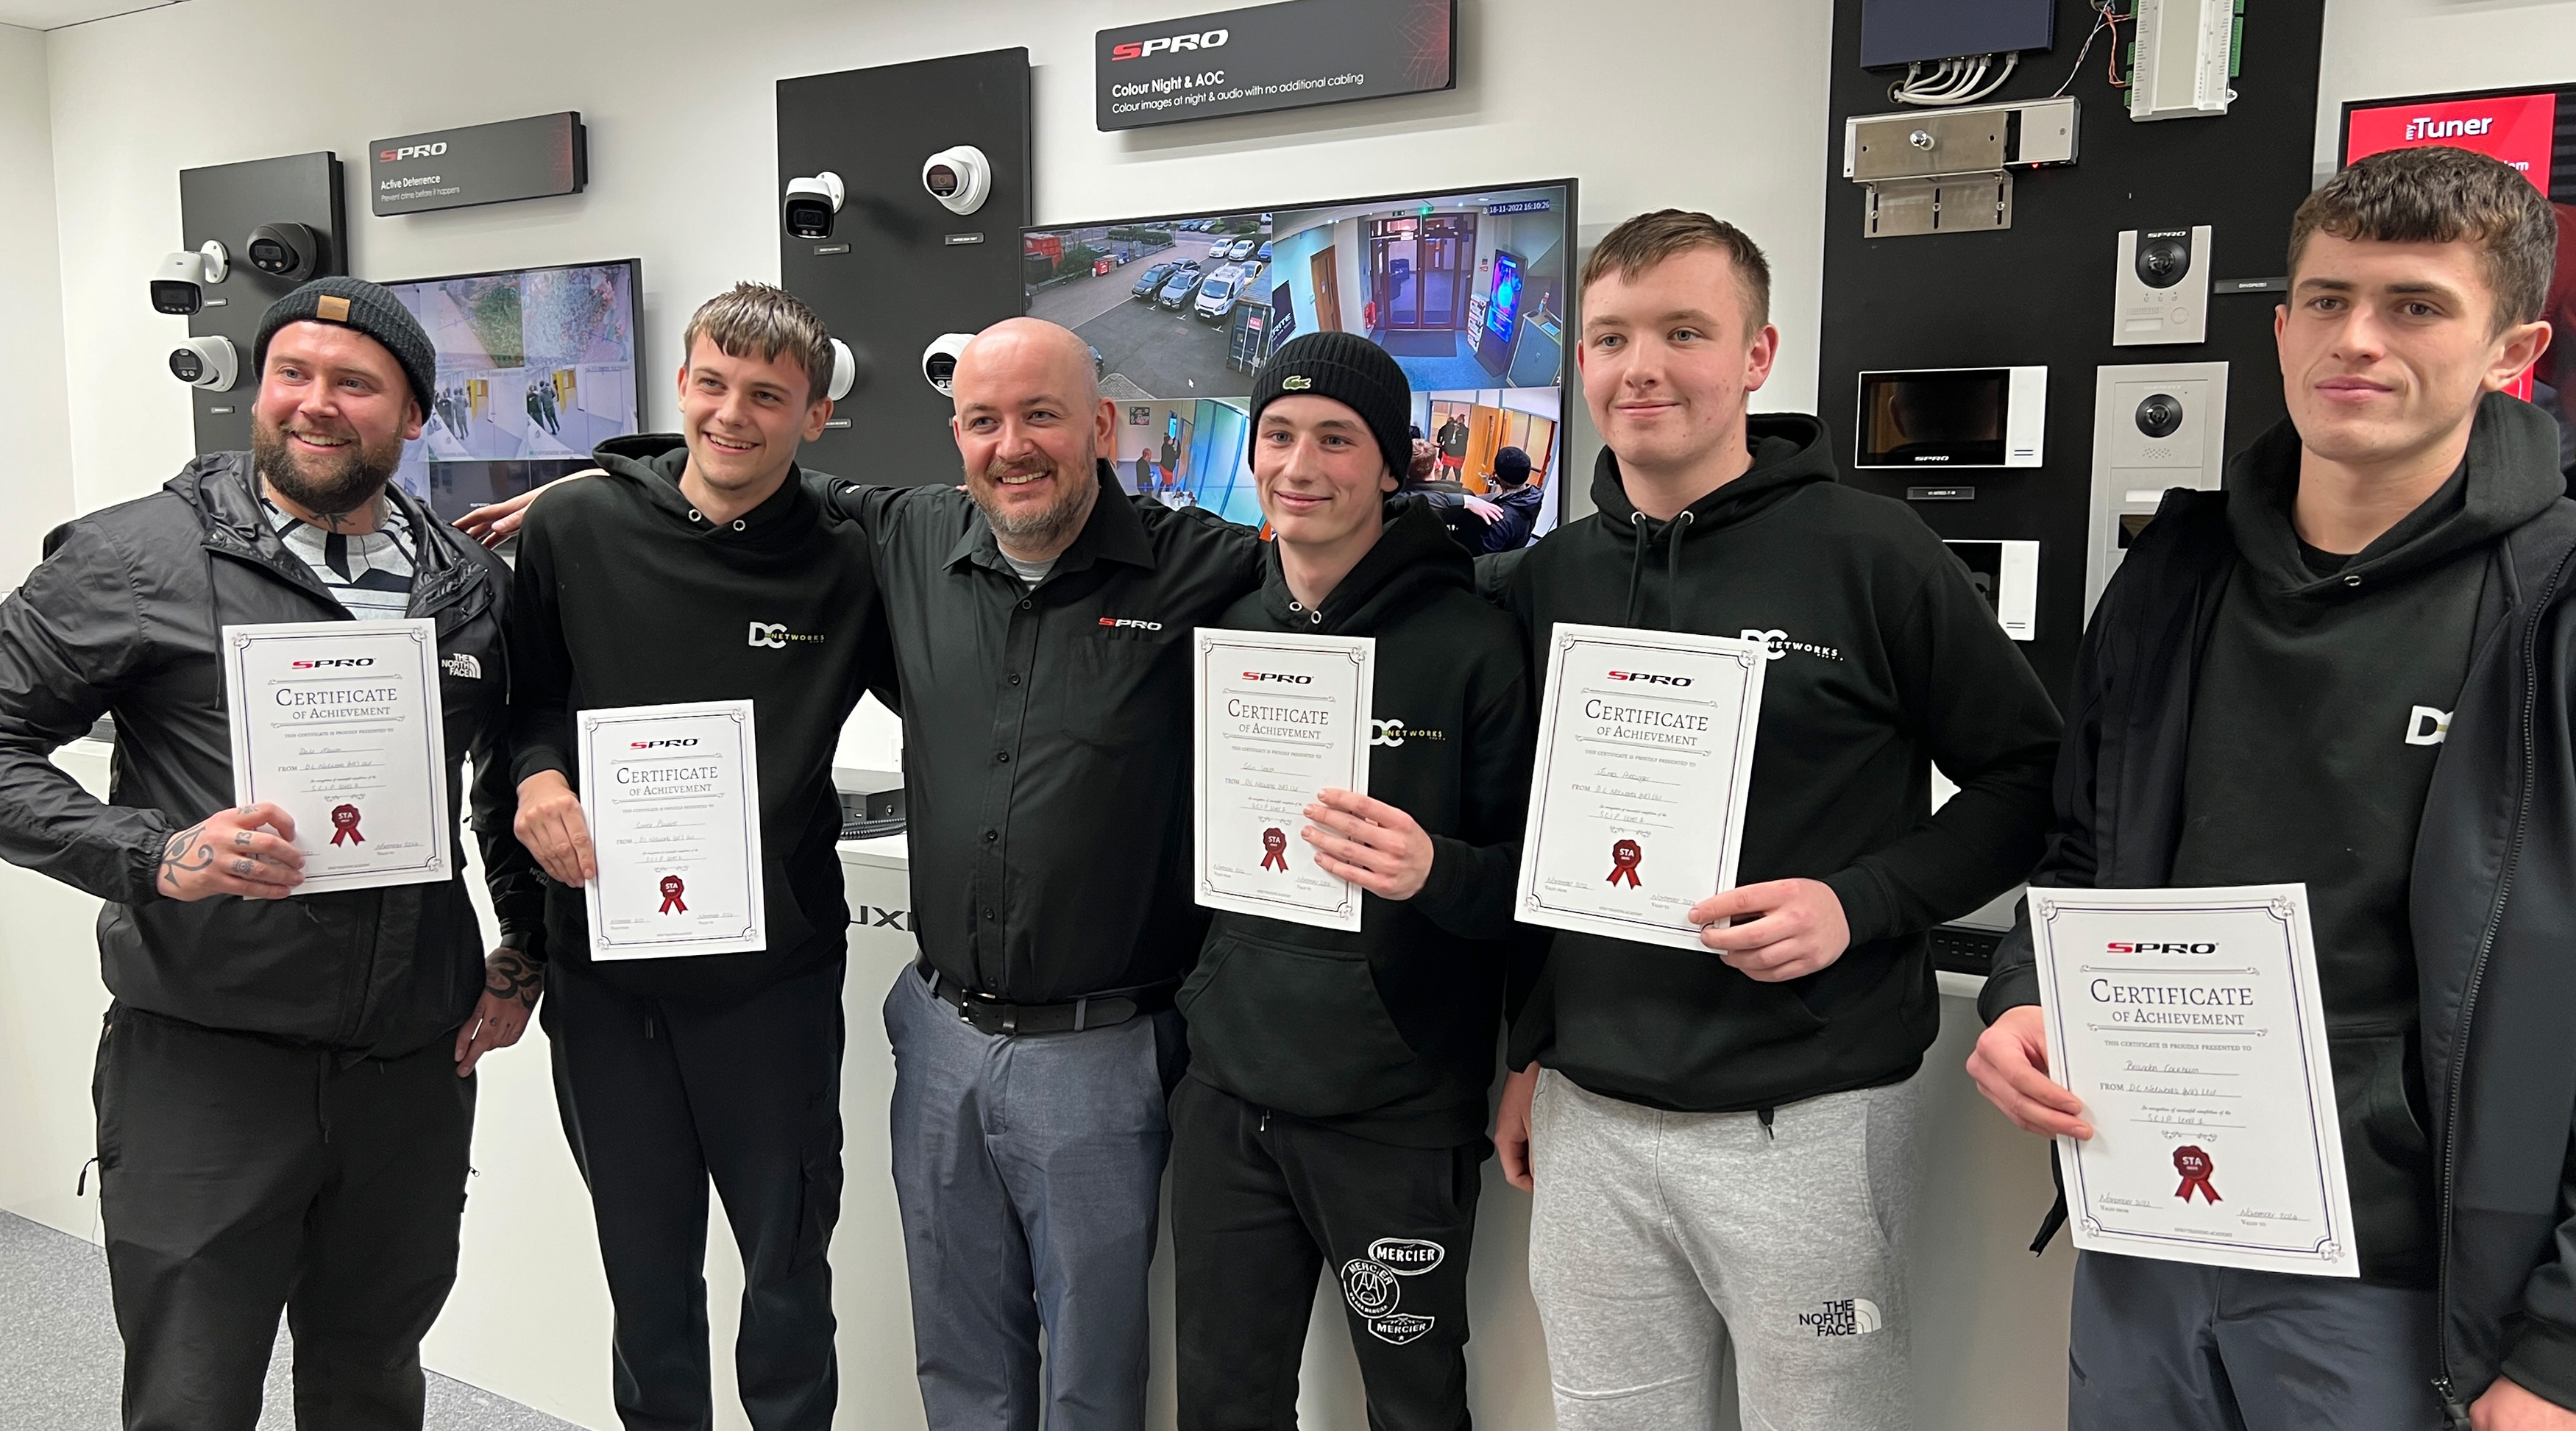 Our latest training day  all installers passed with flying colours!